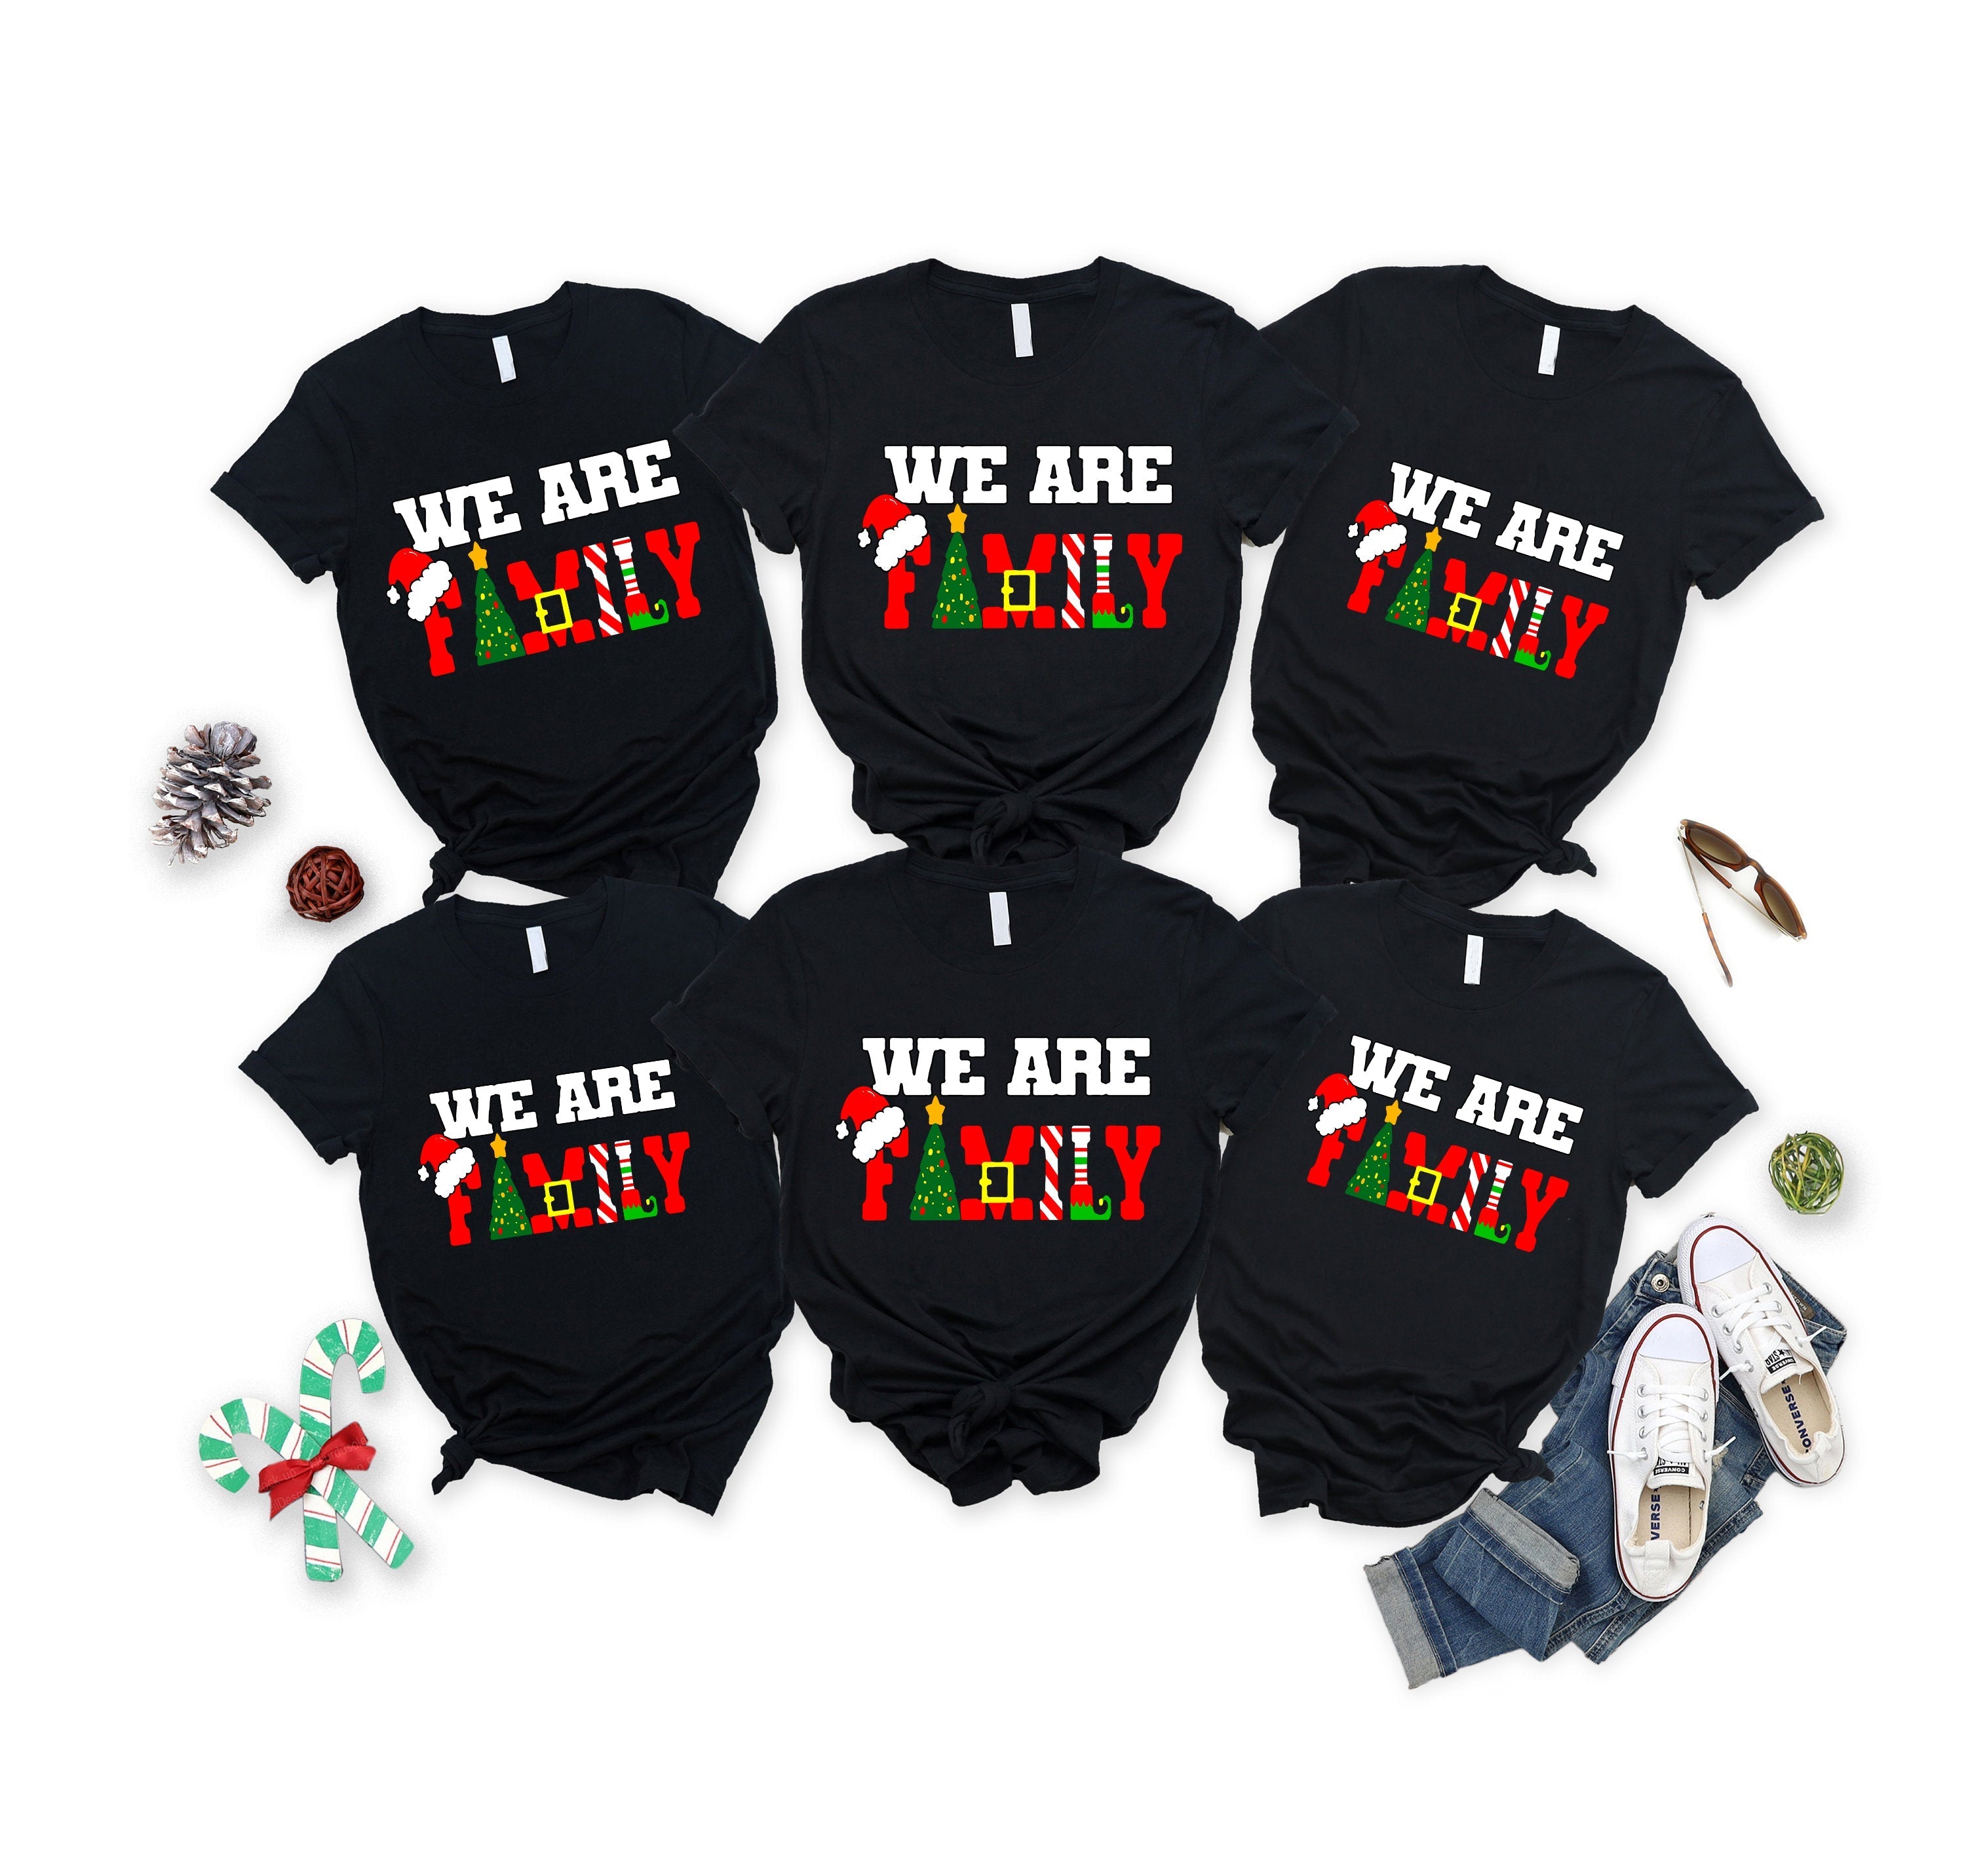 'We Are Family' Colorful Letter Pattern Family Christmas Matching Pajamas Tops Cute Black Short Sleeve T-shirts With Dog Bandana